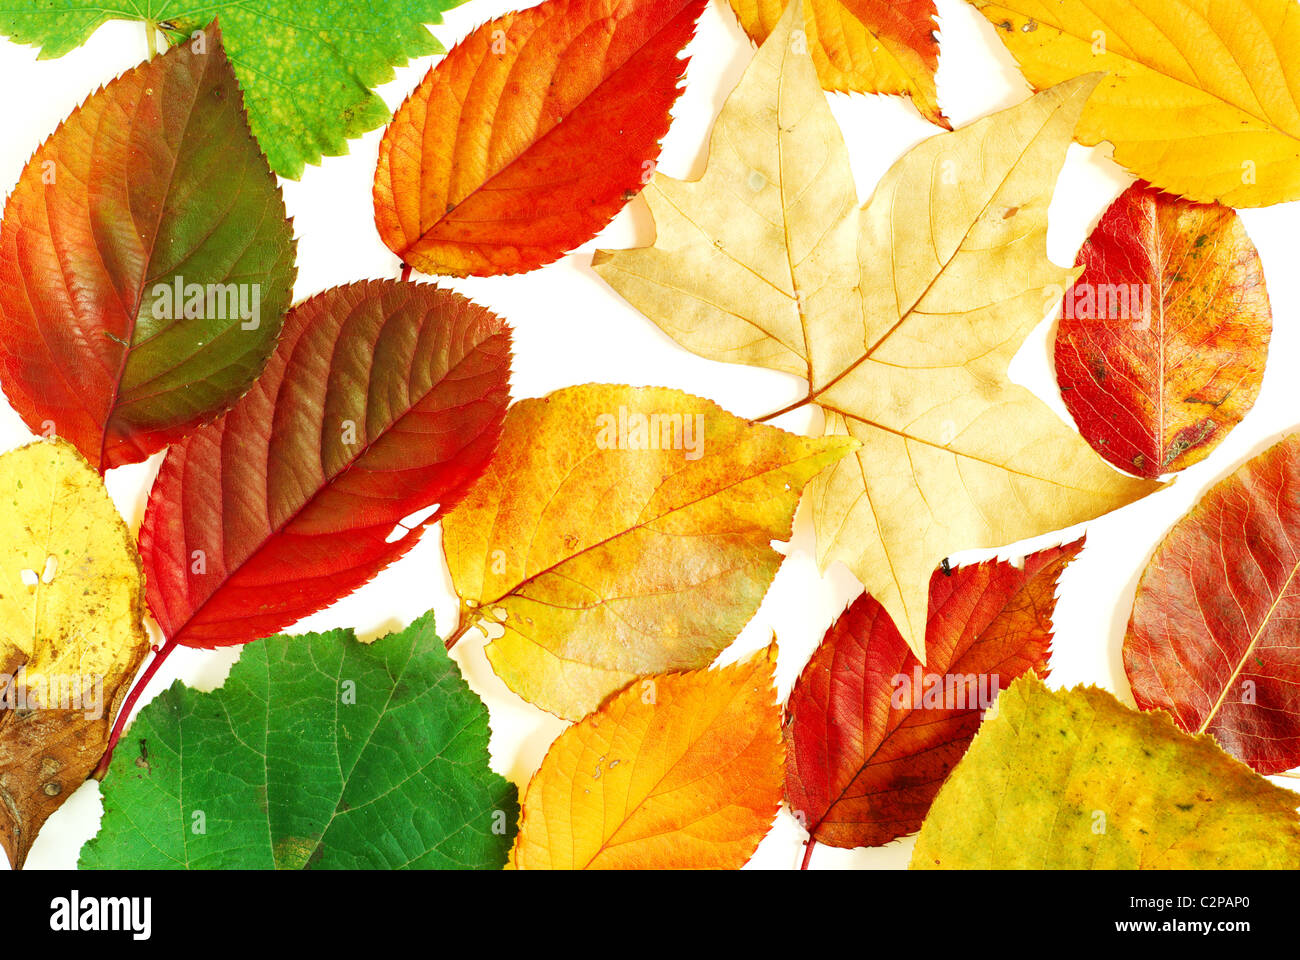 Collection of different shaped and colored autumn leaves photographed on white background Stock Photo